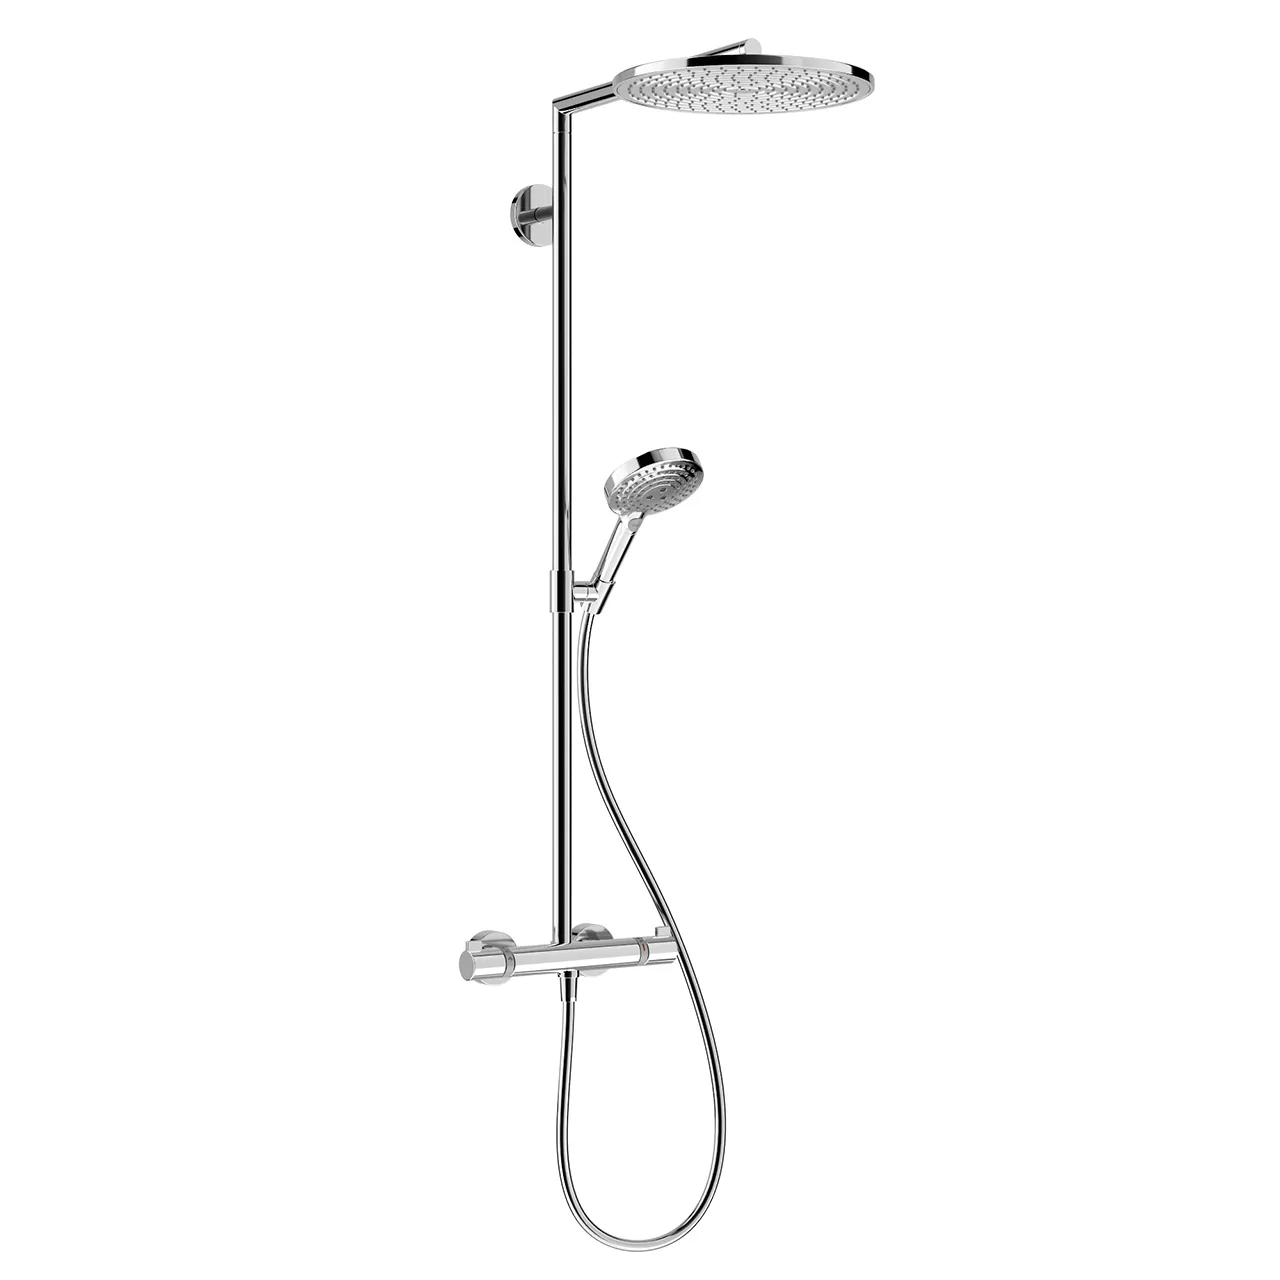 Bathroom – raindance-s-shower-300-thermostat-by-hansgrohe